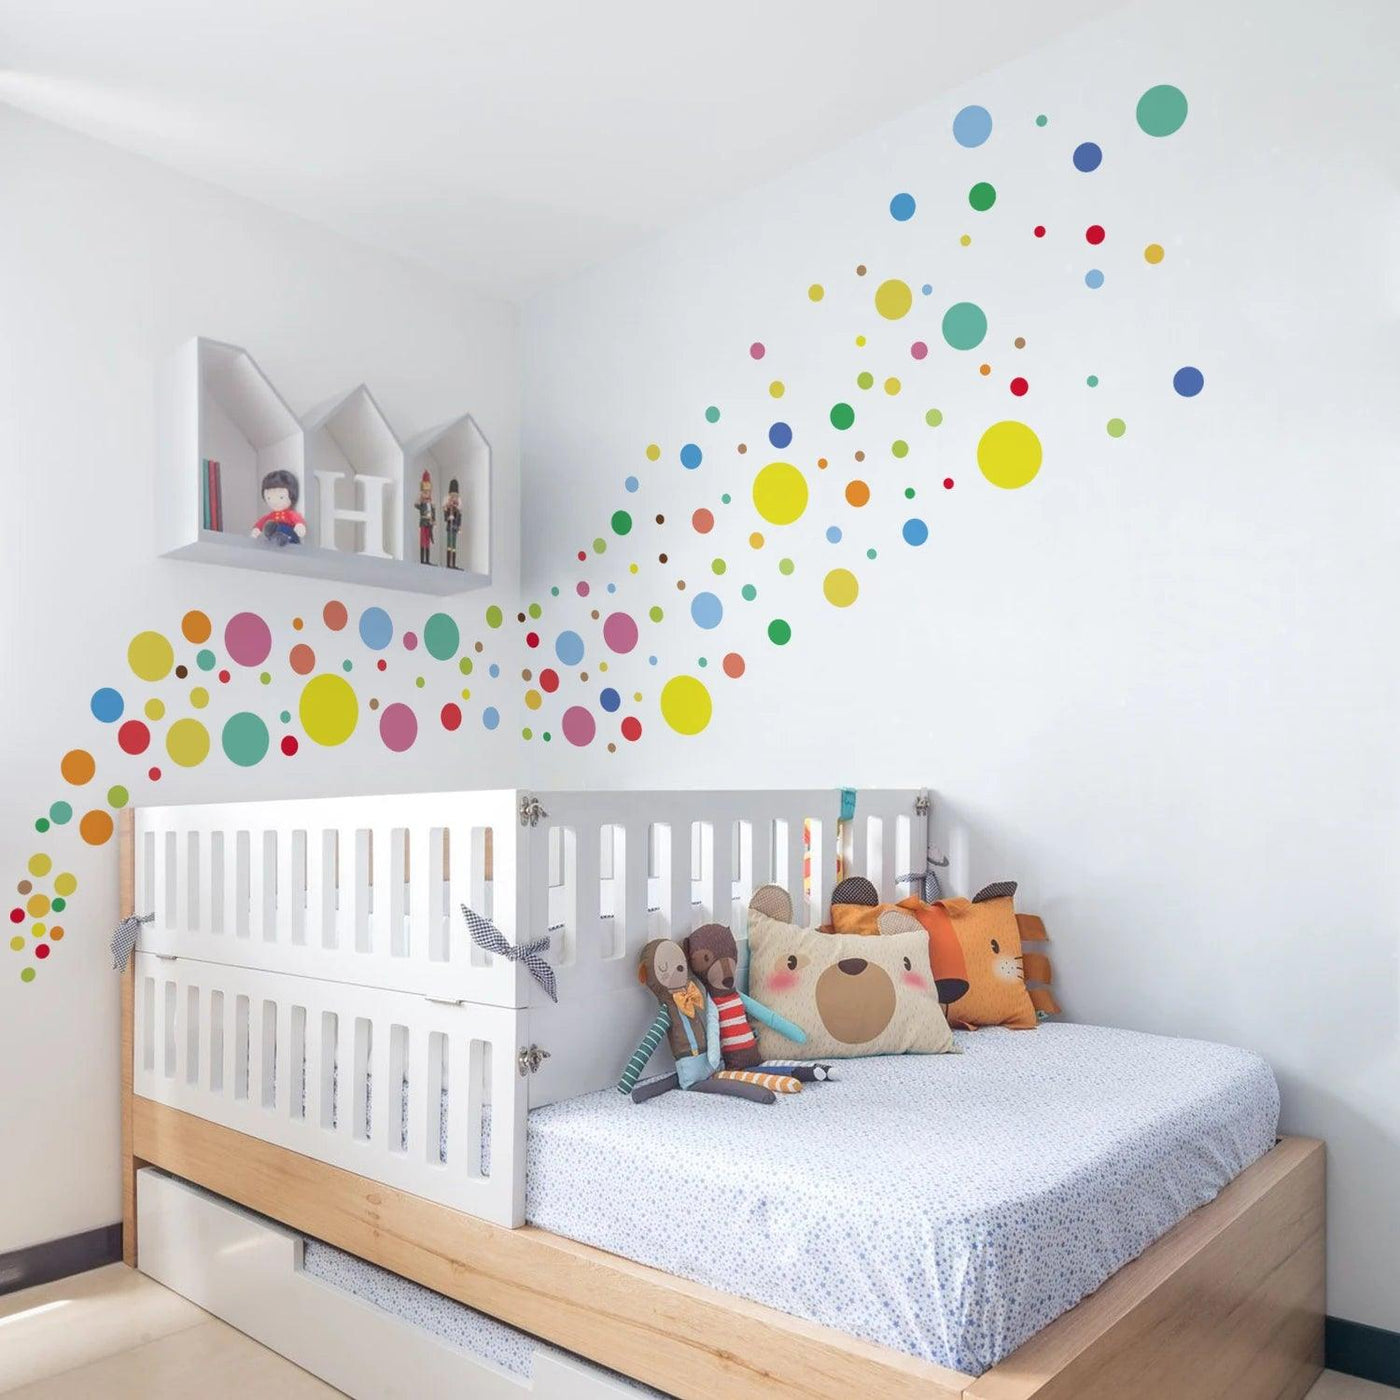 Funlife® Colorful Bright Yellow Art Vinly Polka Dots Wall Sticker Decor for Baby Nursery Child Kid Boy Girl Bedroom Home Decor - Parker and Olive